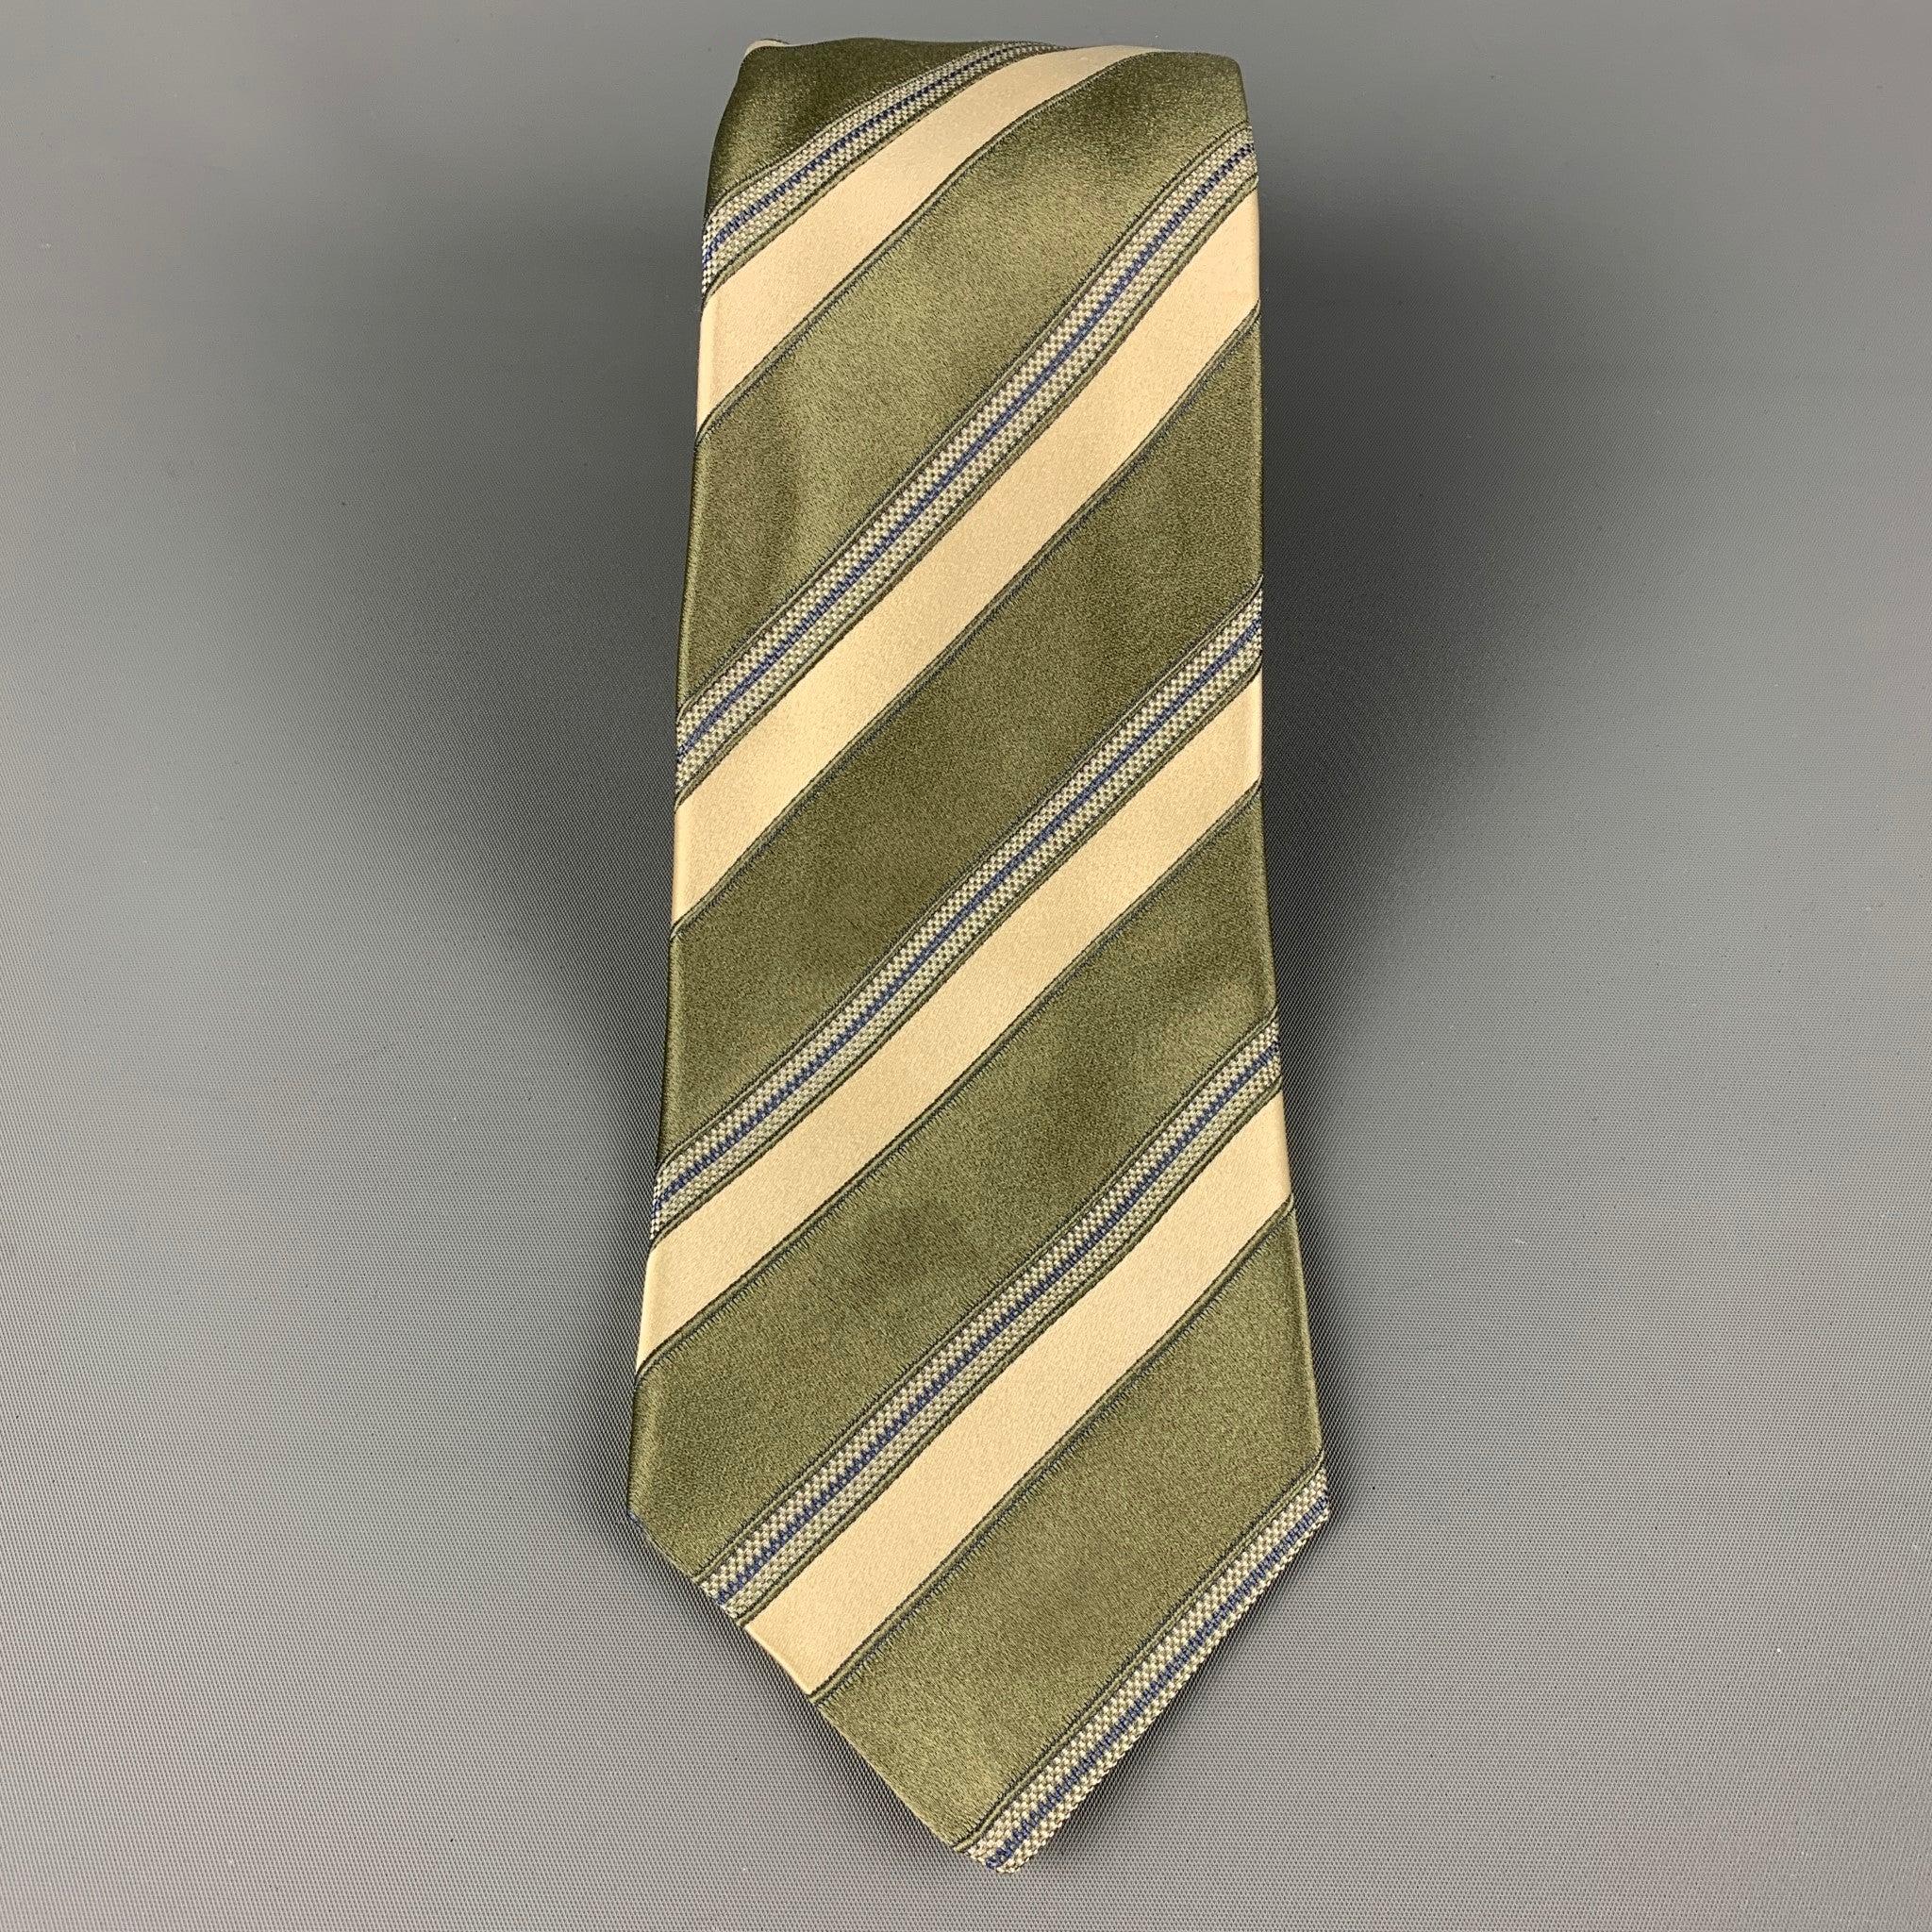 KITON necktie comes in a moss & yellow silk with a all over diagonal stripe print. Made in Italy . Good Pre-Owned Condition. Light discoloration. As-Is.Width: 3.75 inches  Length: 62 inches 


  
  
 
Reference: 120377
Category: Tie
More Details
   